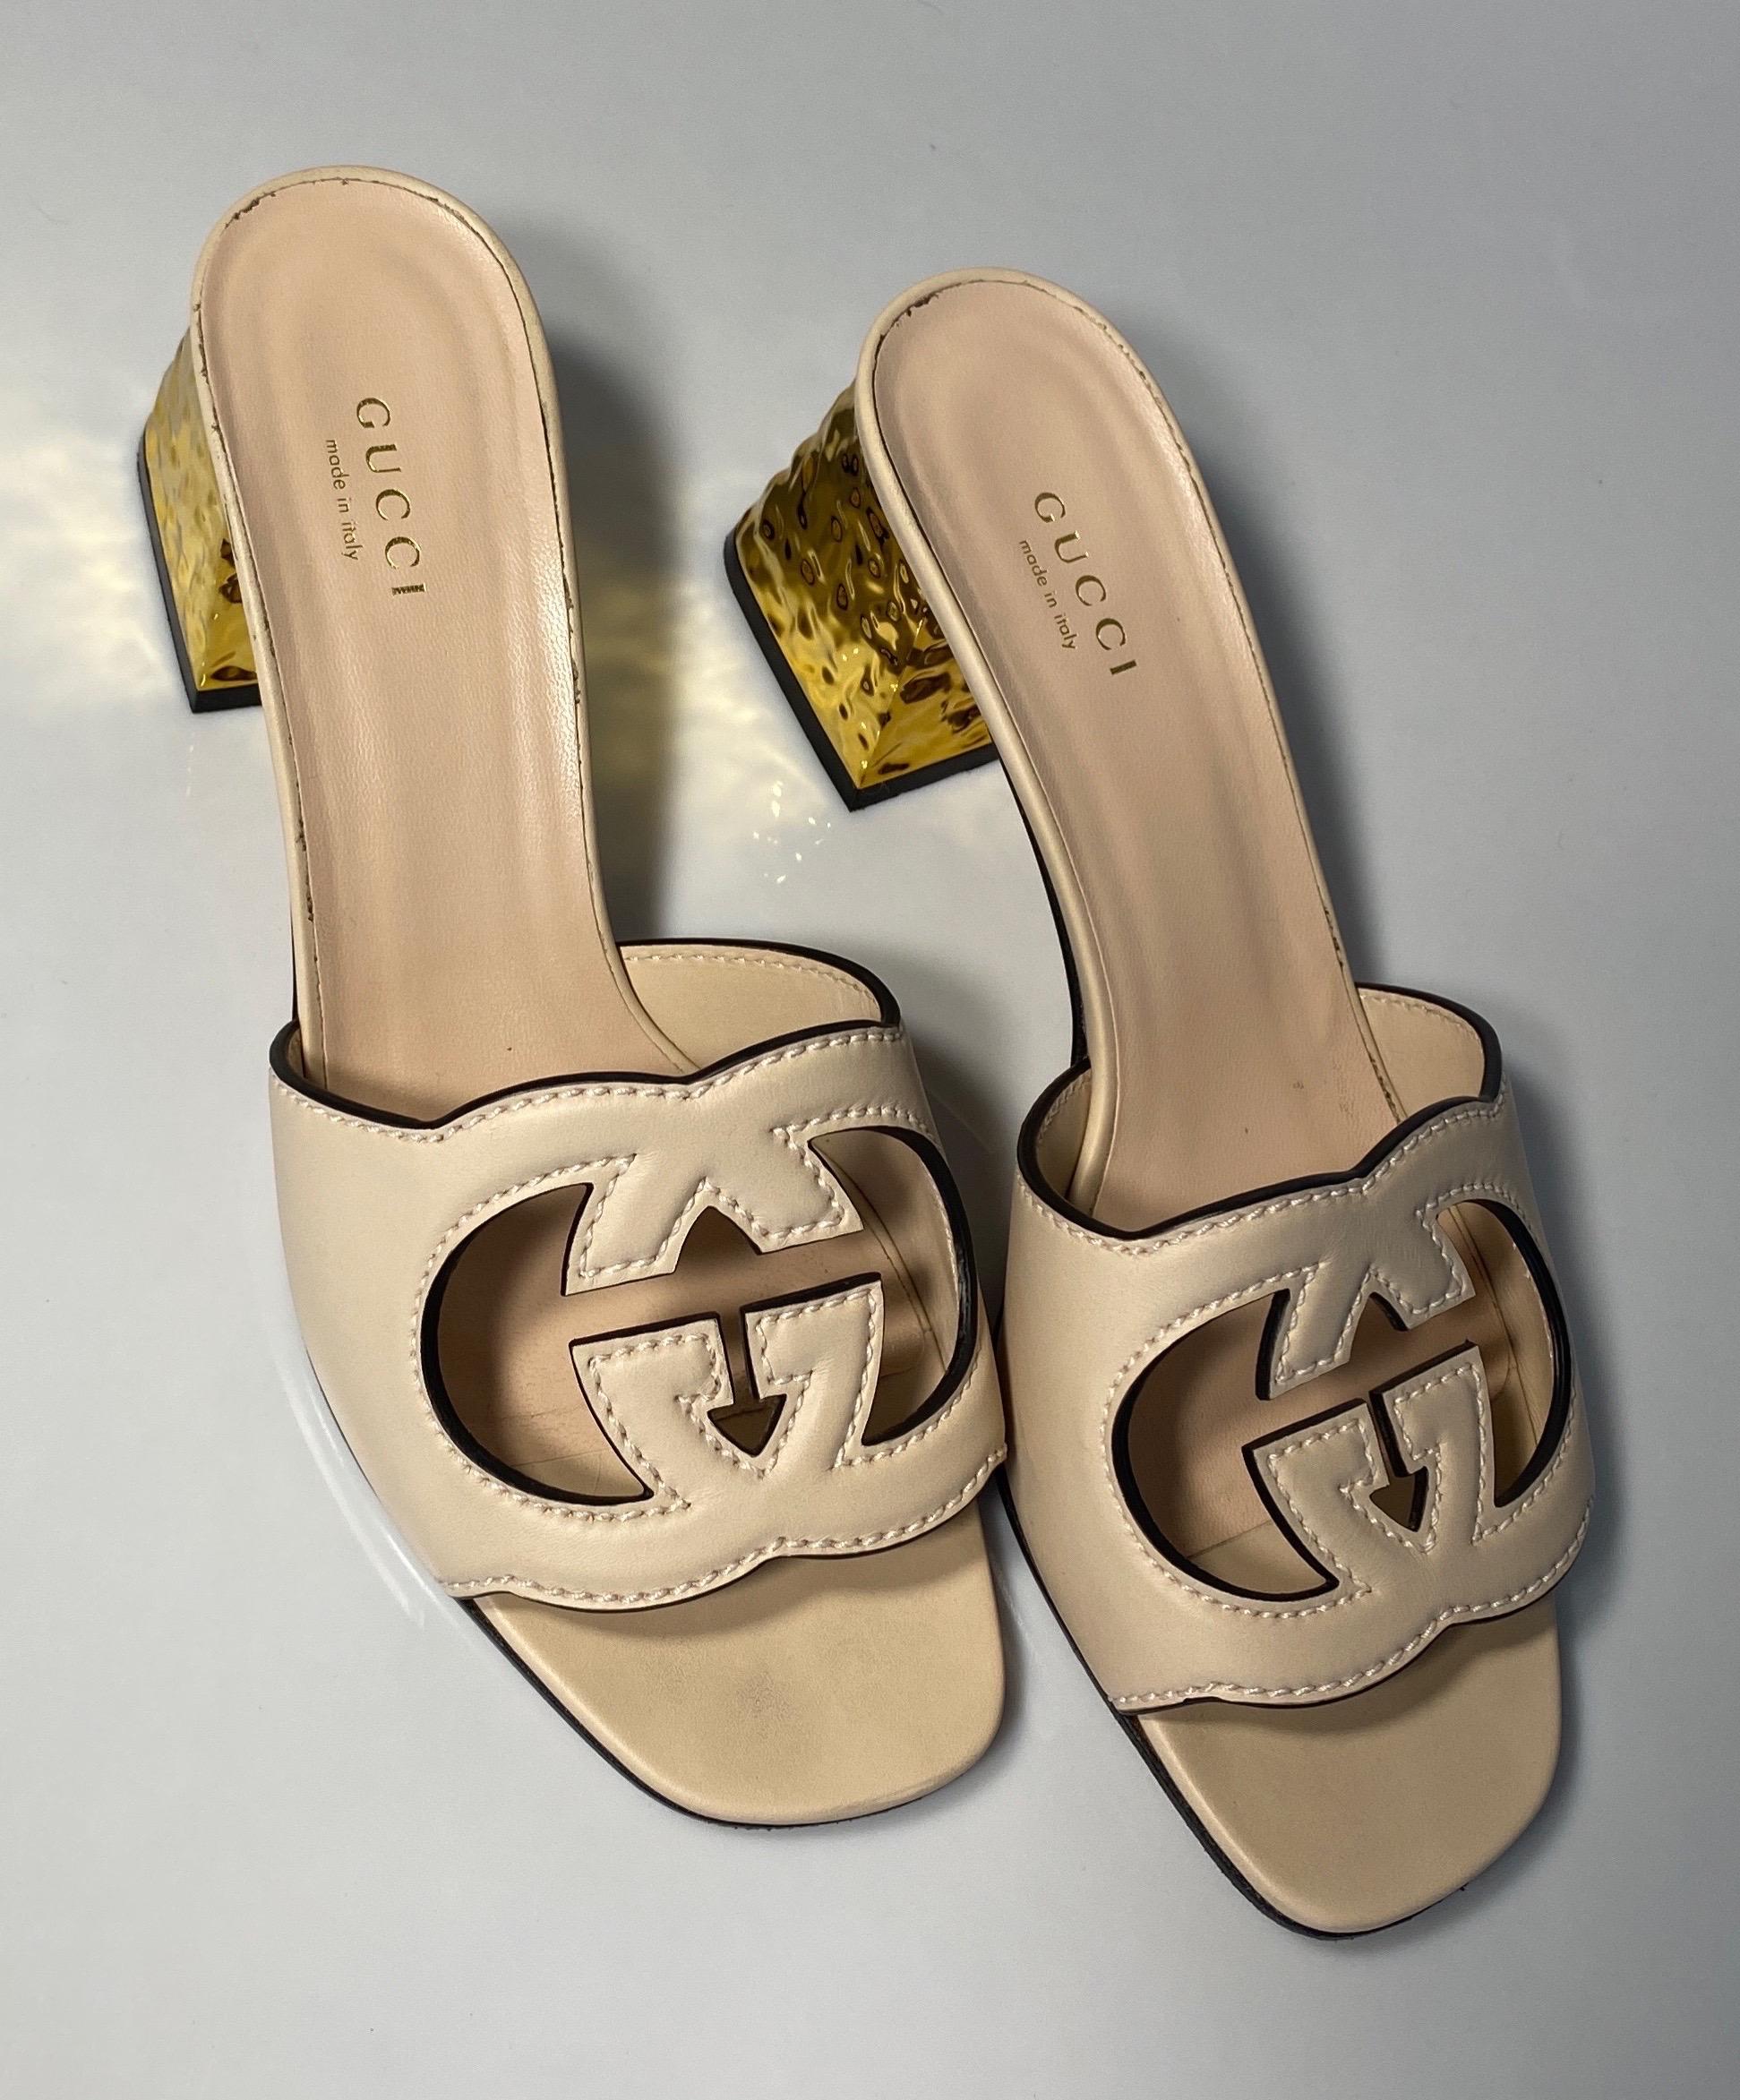 Gucci Rose Leather Interlocking G Cut-out Sandal - Size 37.5 14